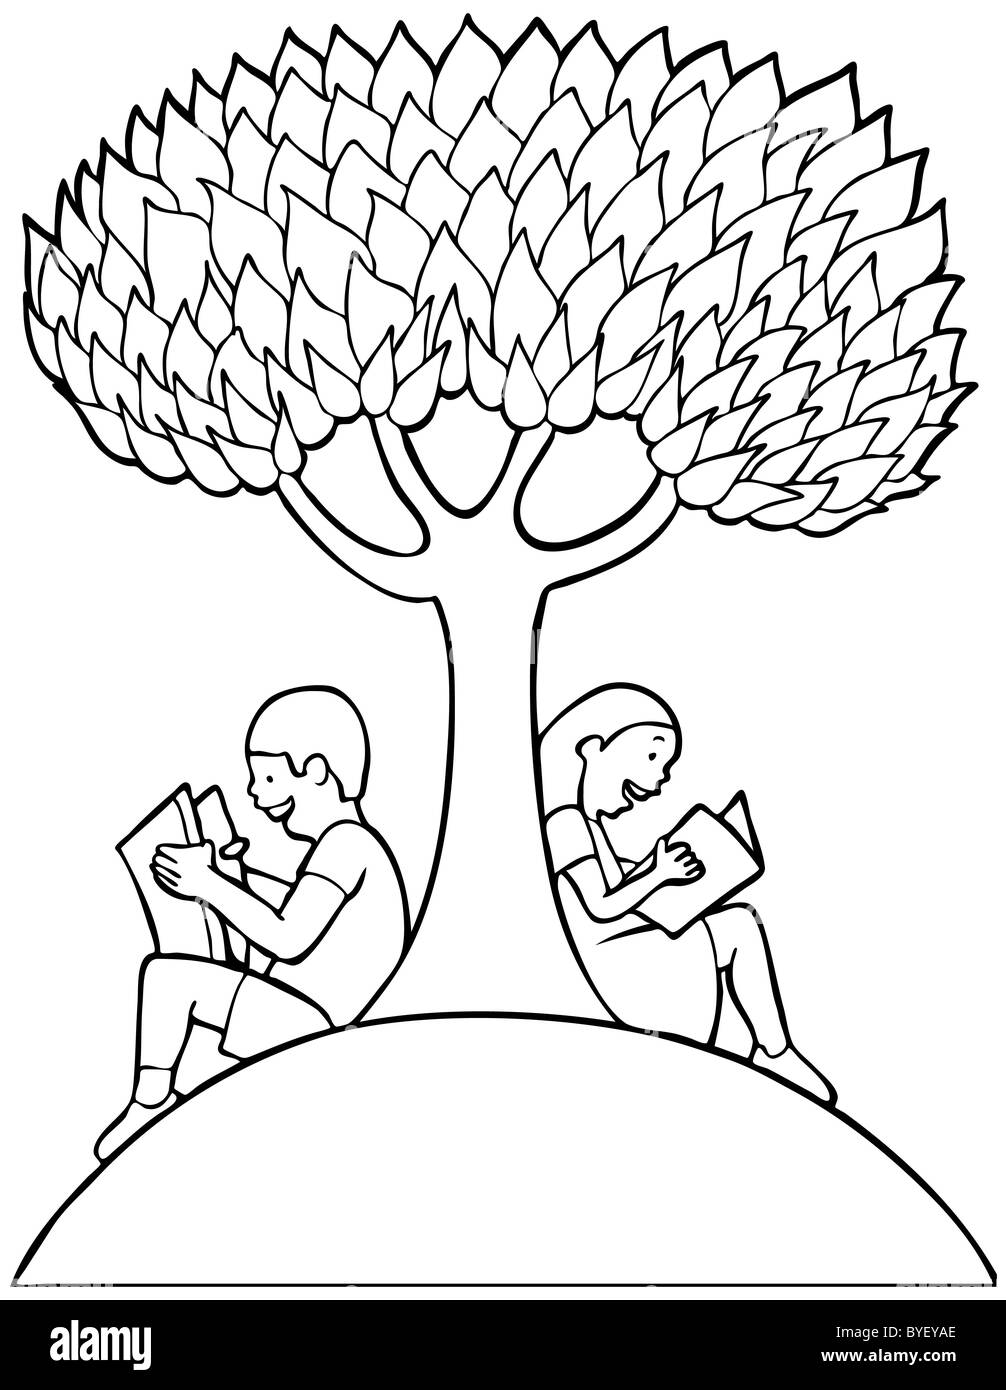 under the tree clipart black and white